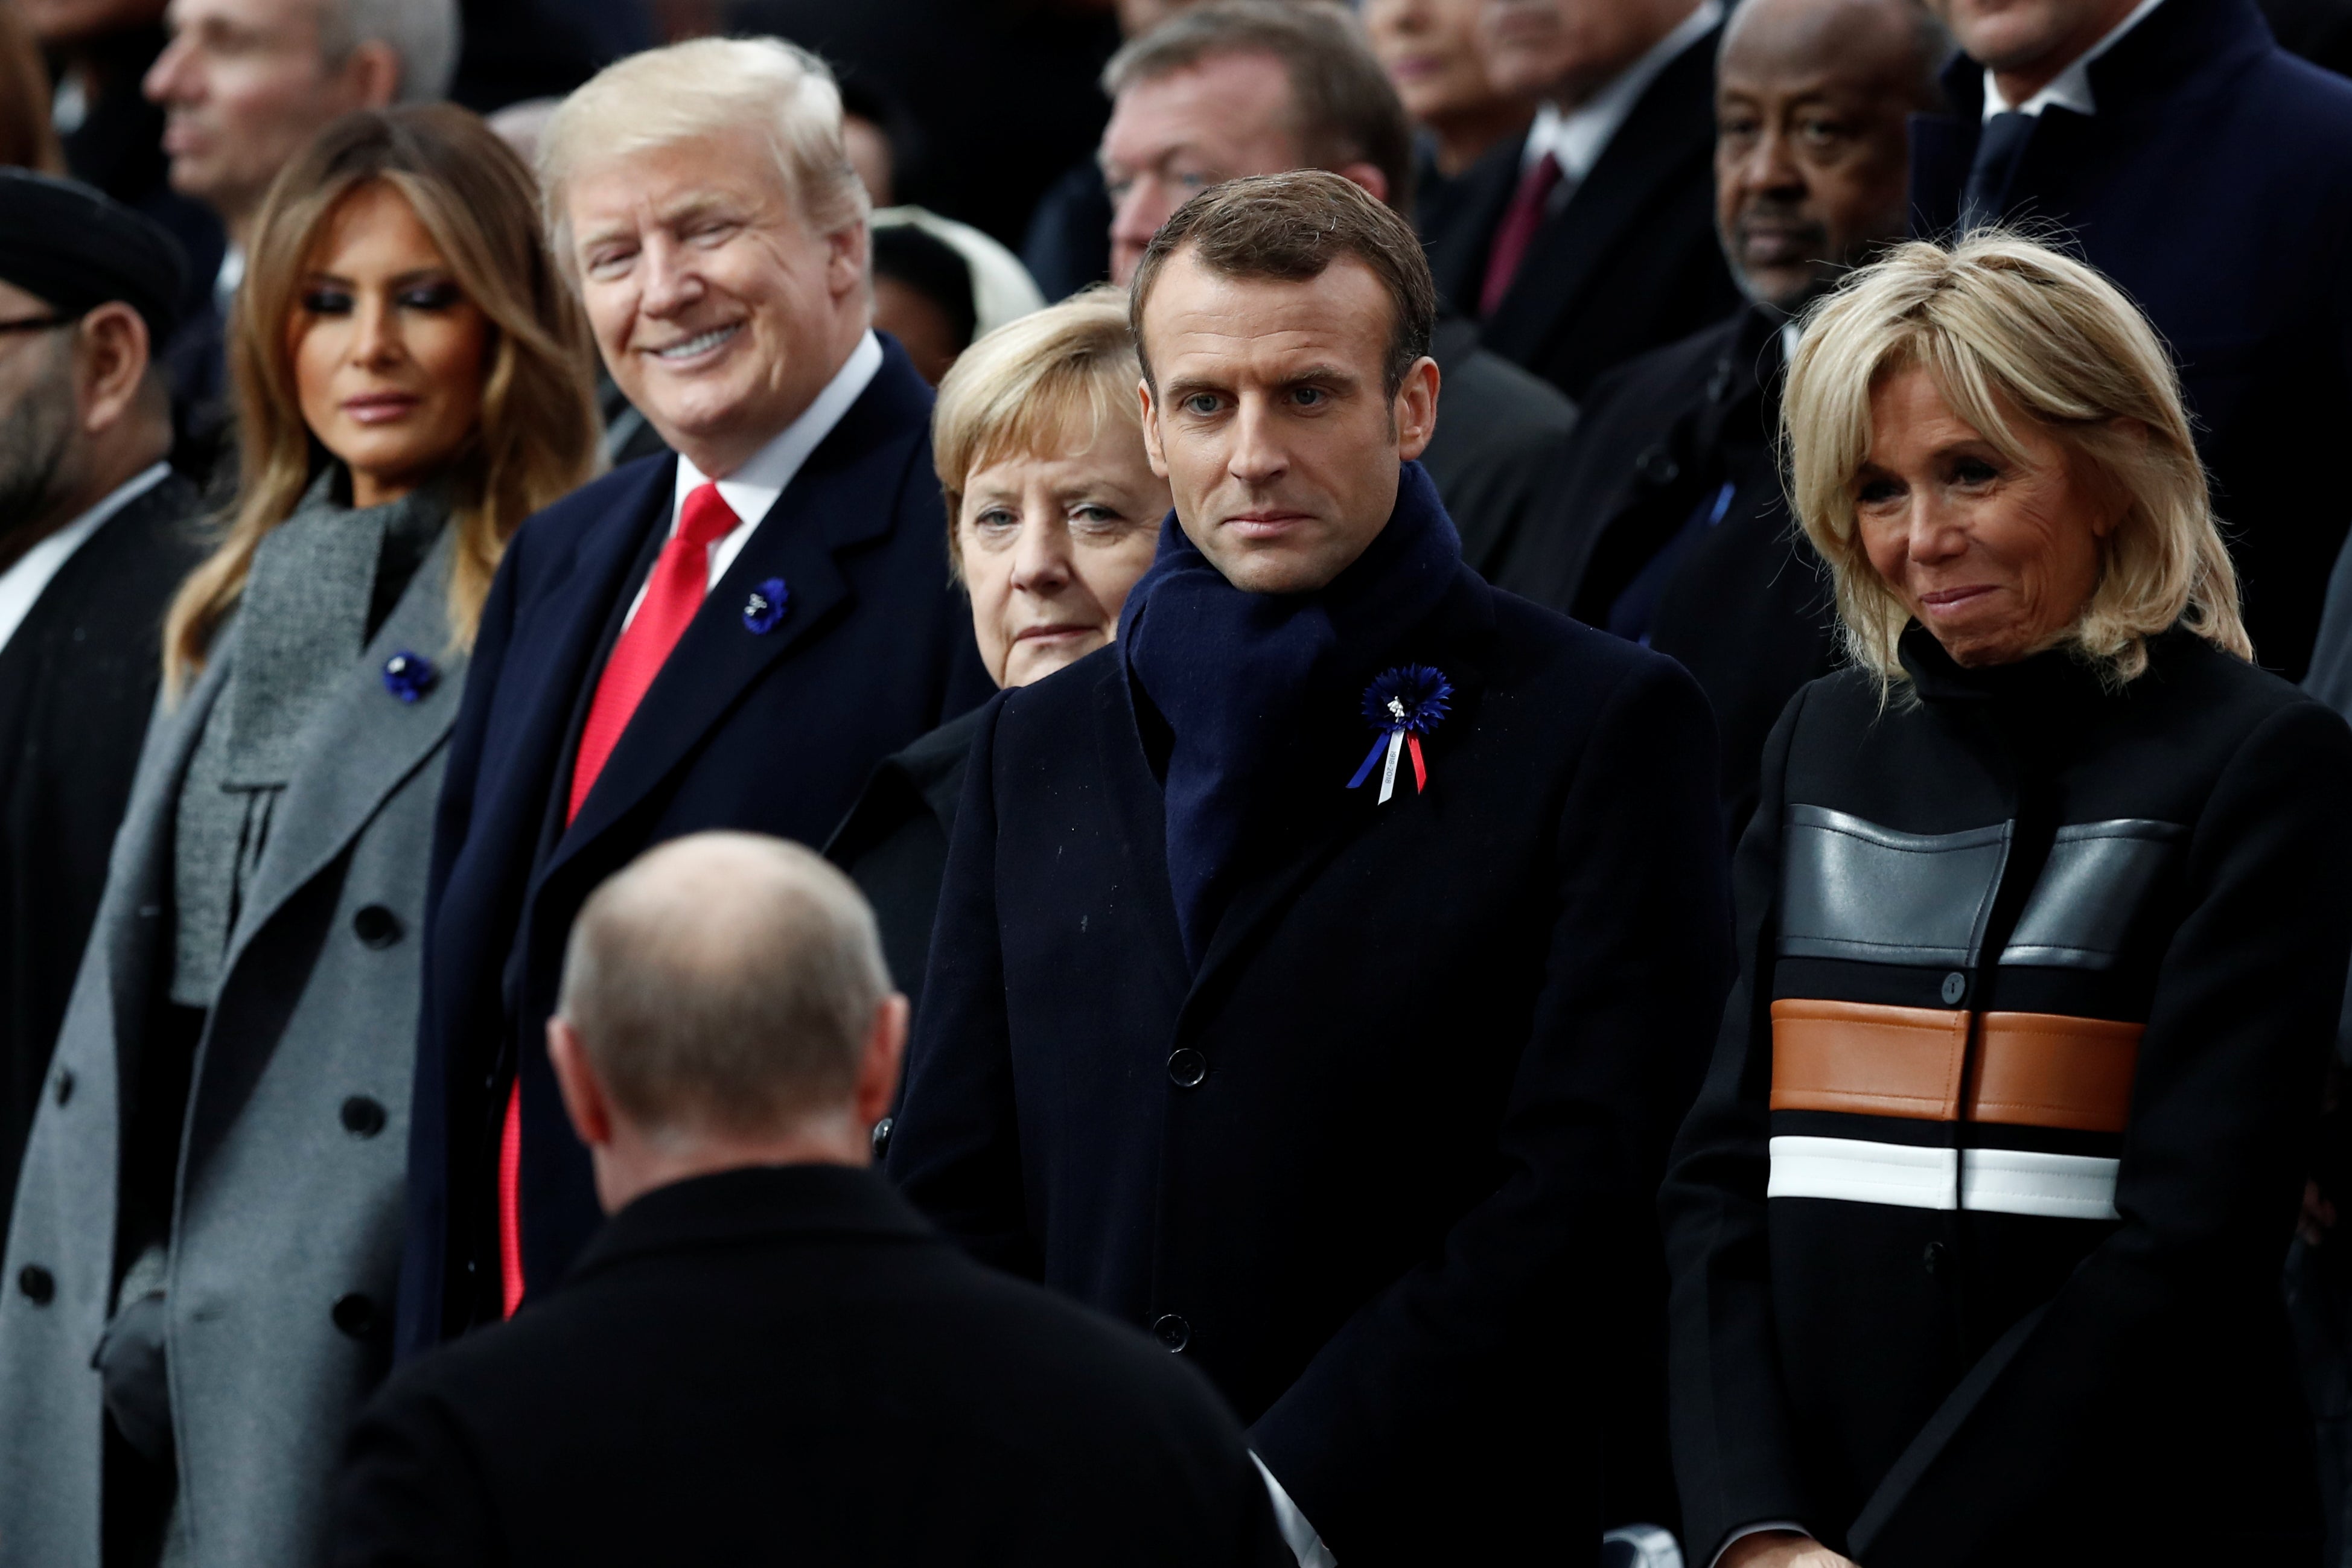 Russian President Vladimir Putin arrives to take his place with French President Emmanuel Macron, Brigitte Macron, German Chancellor Angela Merkel, President Donald Trump, and first lady Melania Trump at the Arc de Triomphe in Paris, France on November 11, 2018. 